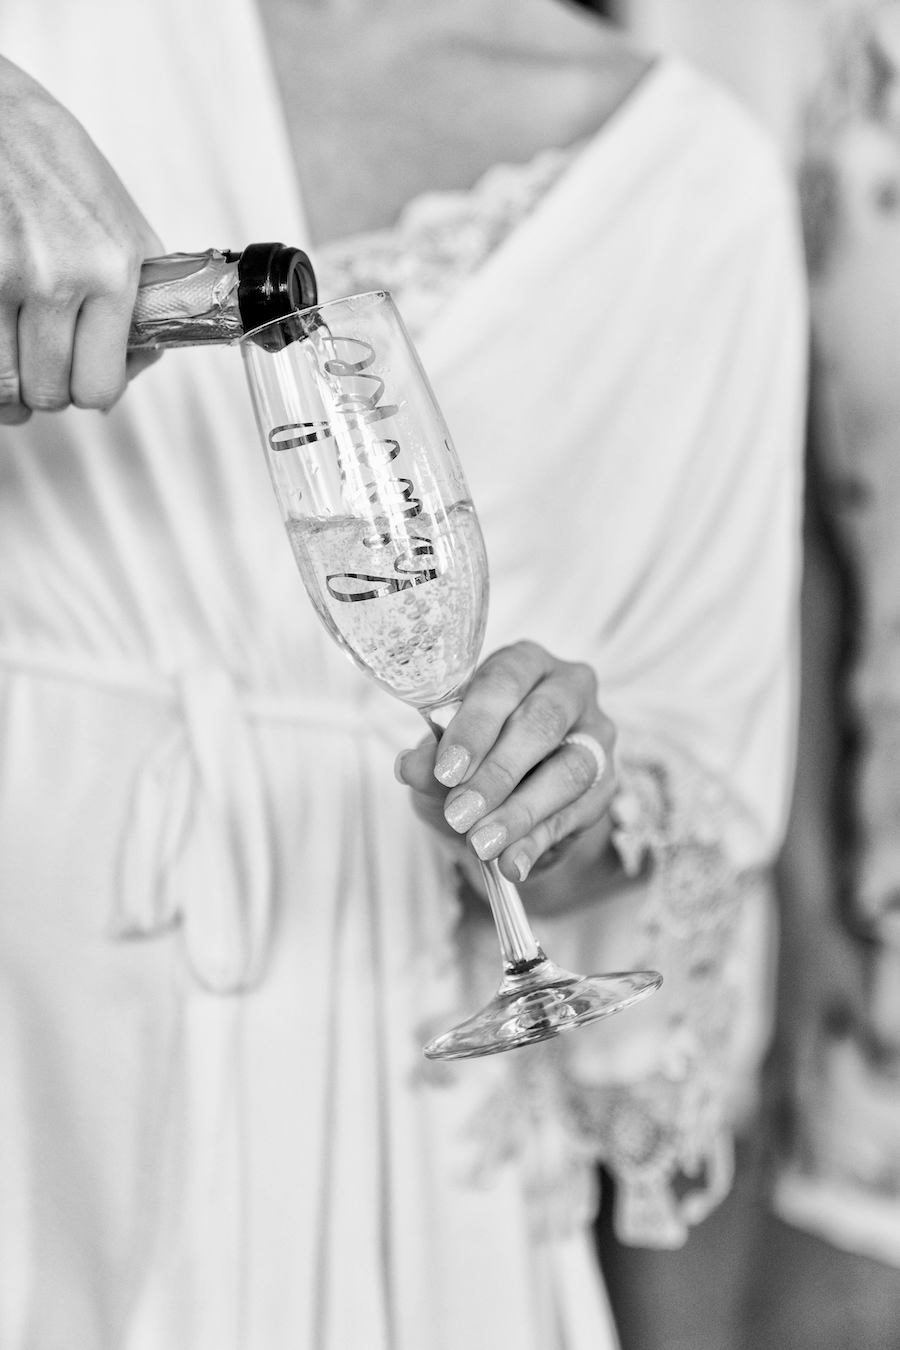 A bride pouring champagne the morning of her wedding